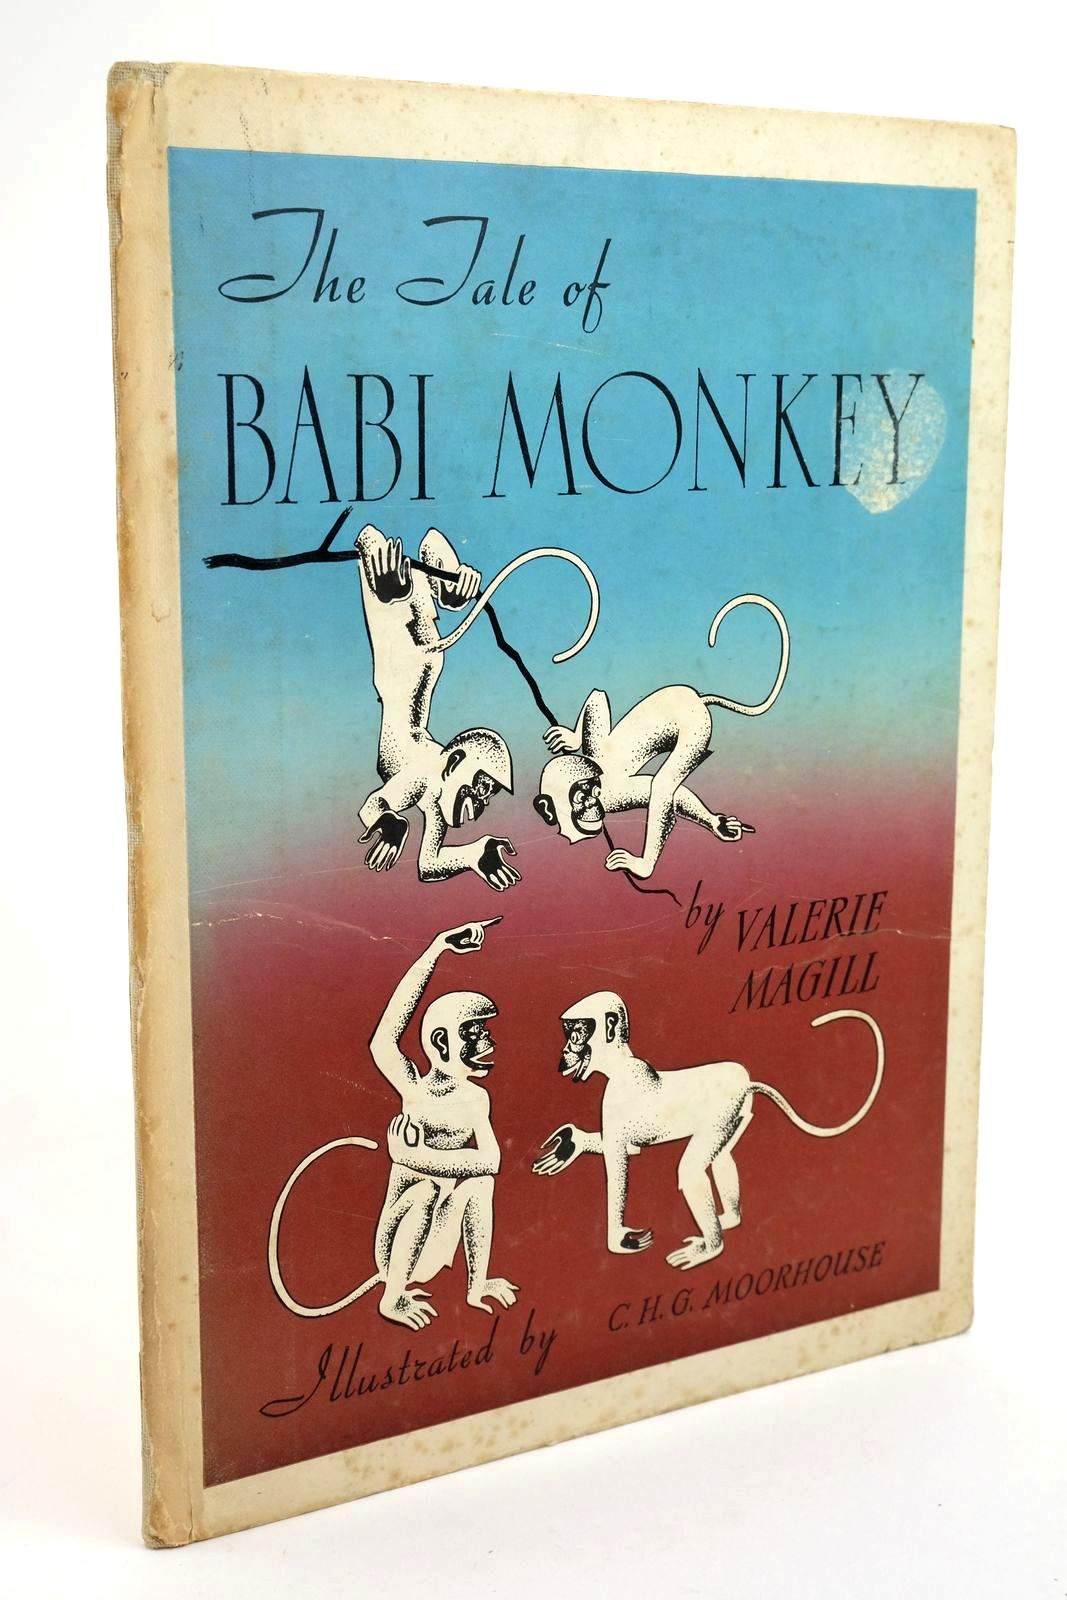 Photo of THE TALE OF BABI MONKEY written by Magill, Valerie illustrated by Moorhouse, C.H.G. published by Longmans, Green &amp; Co. (STOCK CODE: 1321782)  for sale by Stella & Rose's Books